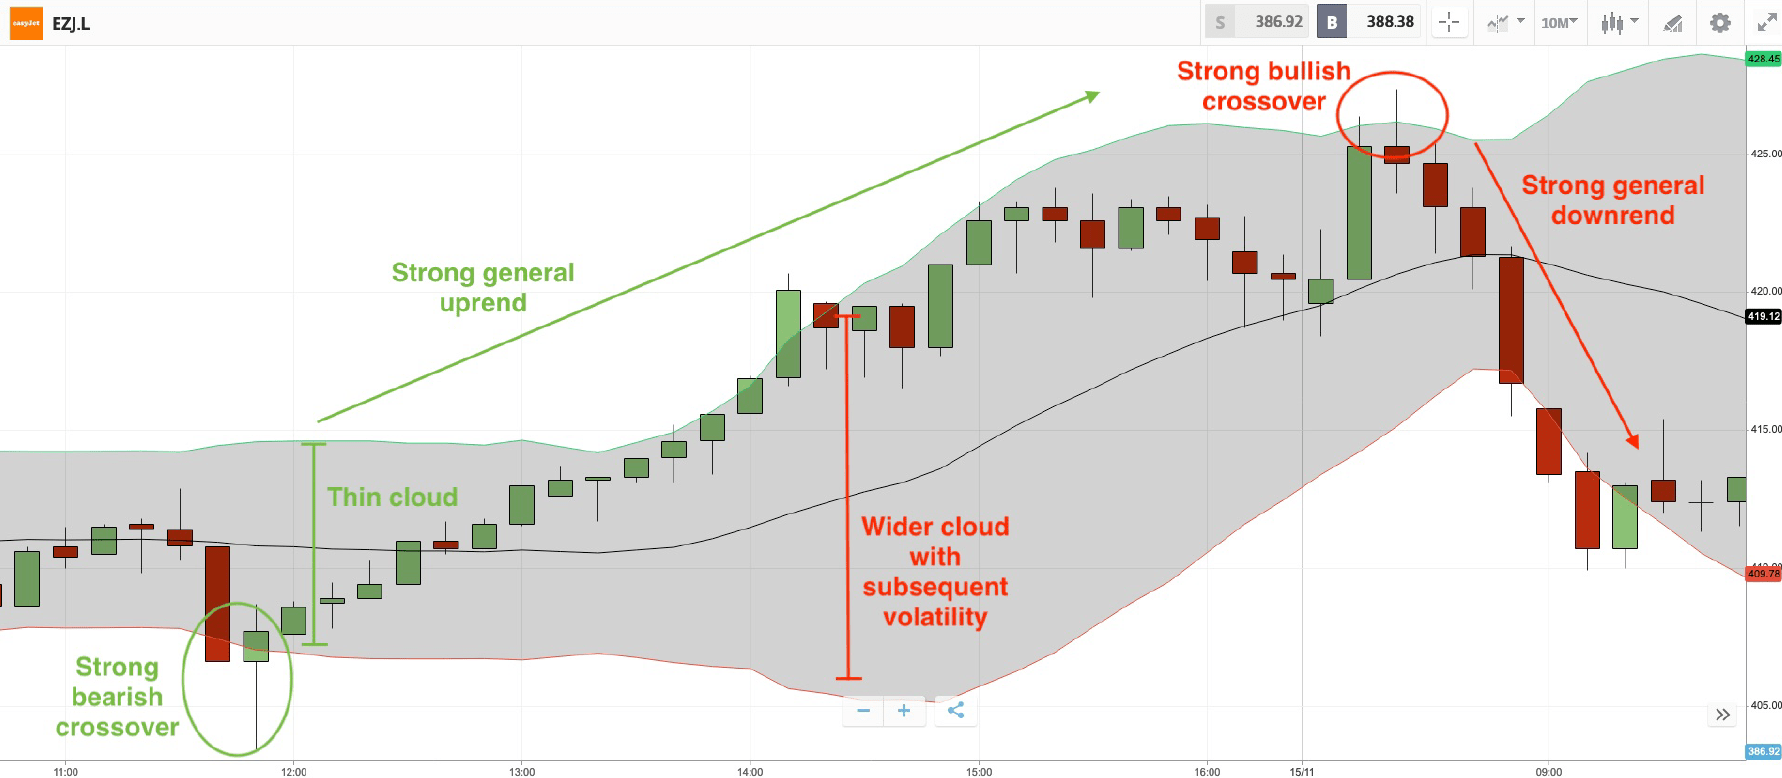 Using bollinger bands with the binary options reversal strategy on UK stocks